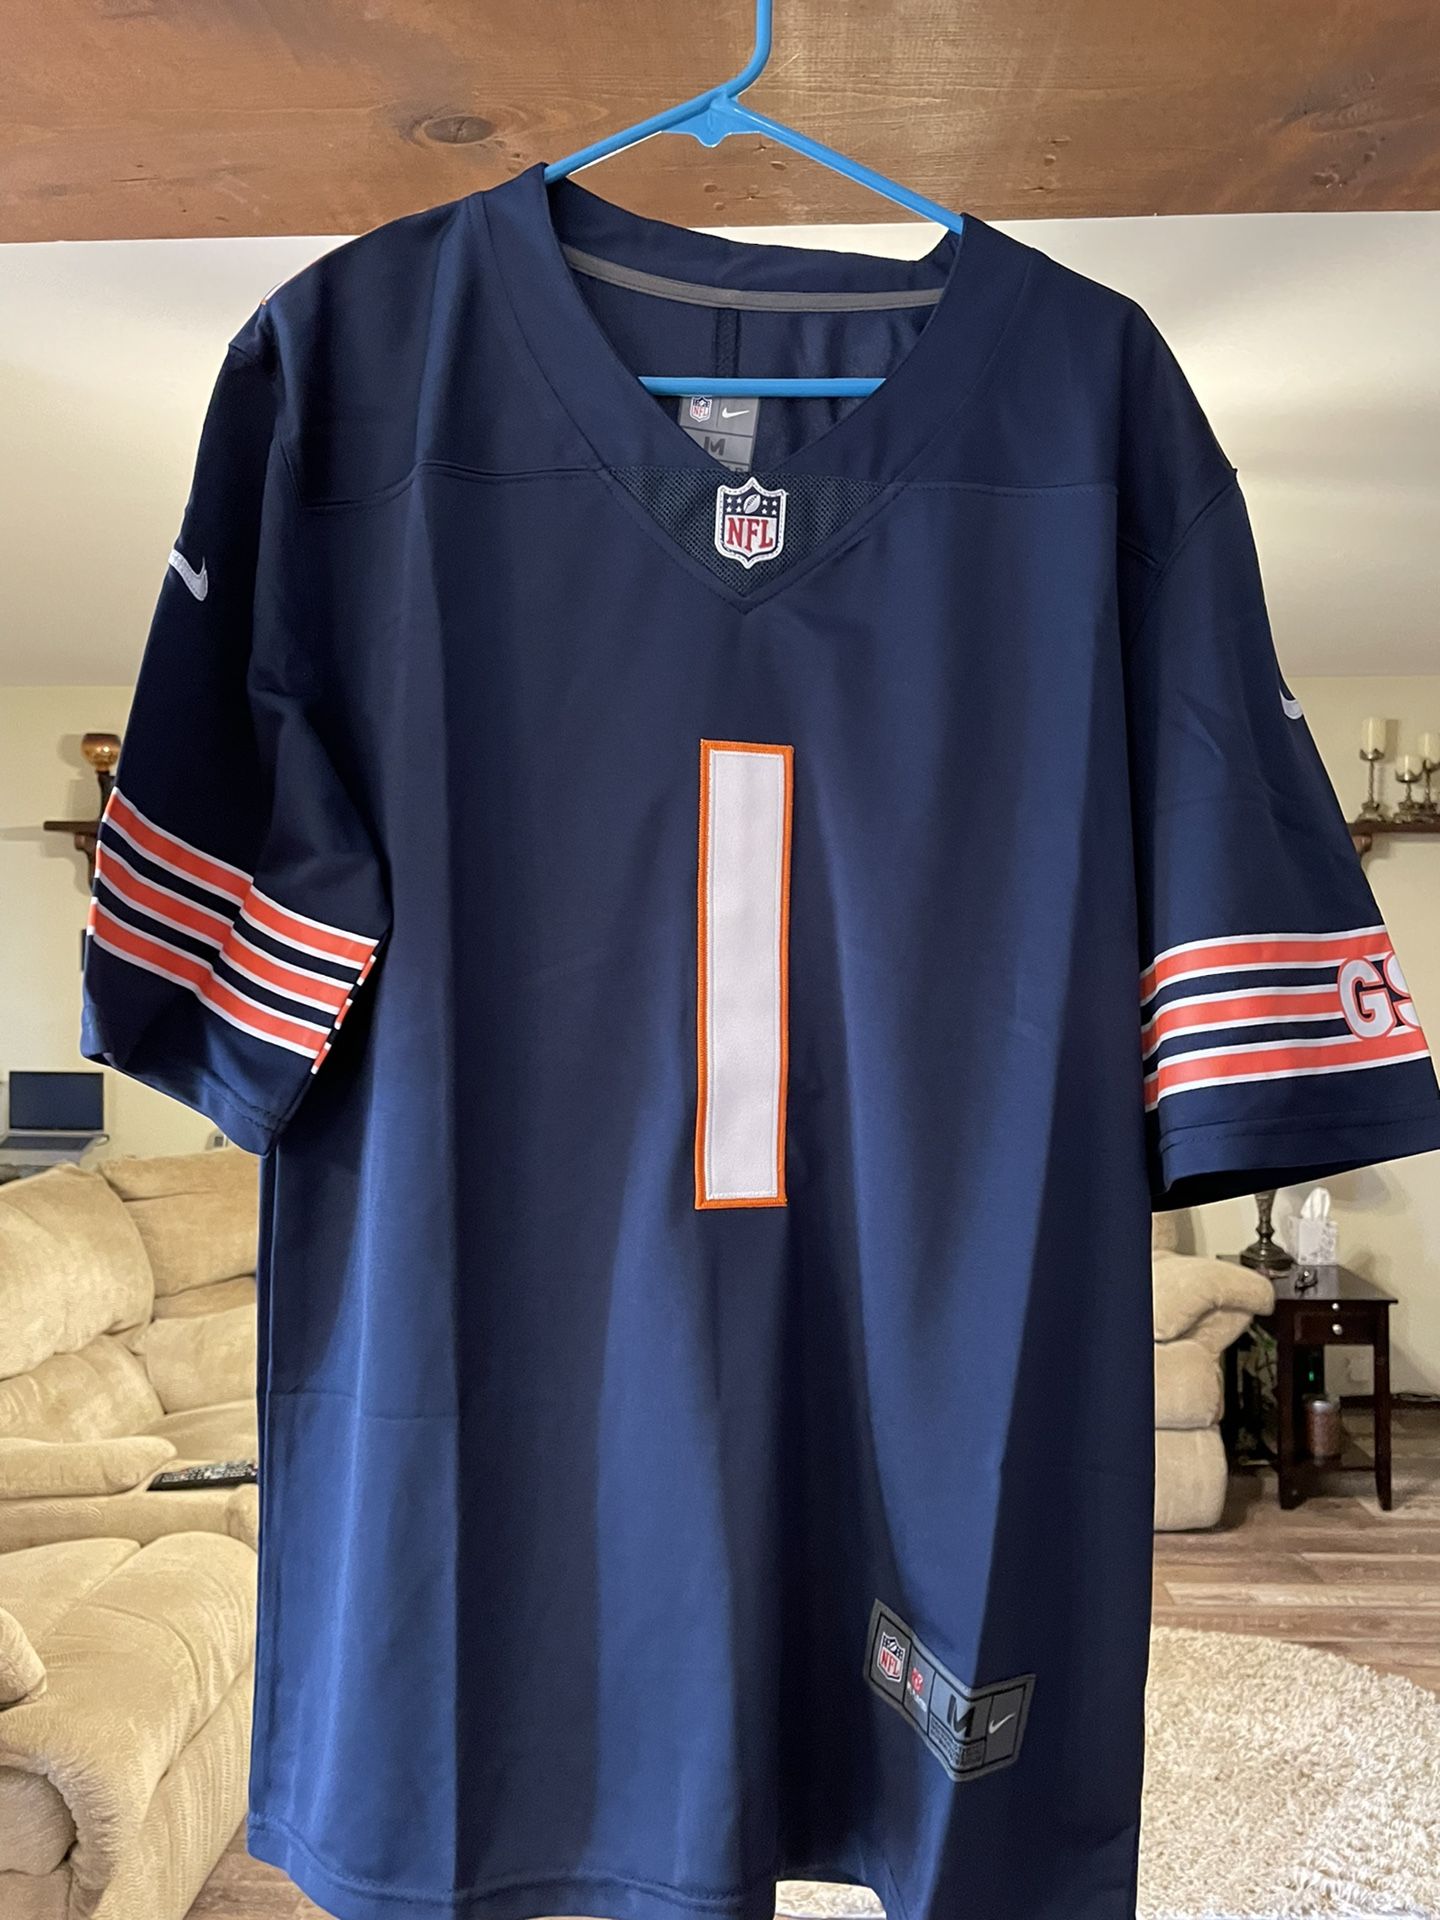 Justin Fields Chicago Bears NFL Jersey for Sale in Bolingbrook, IL - OfferUp